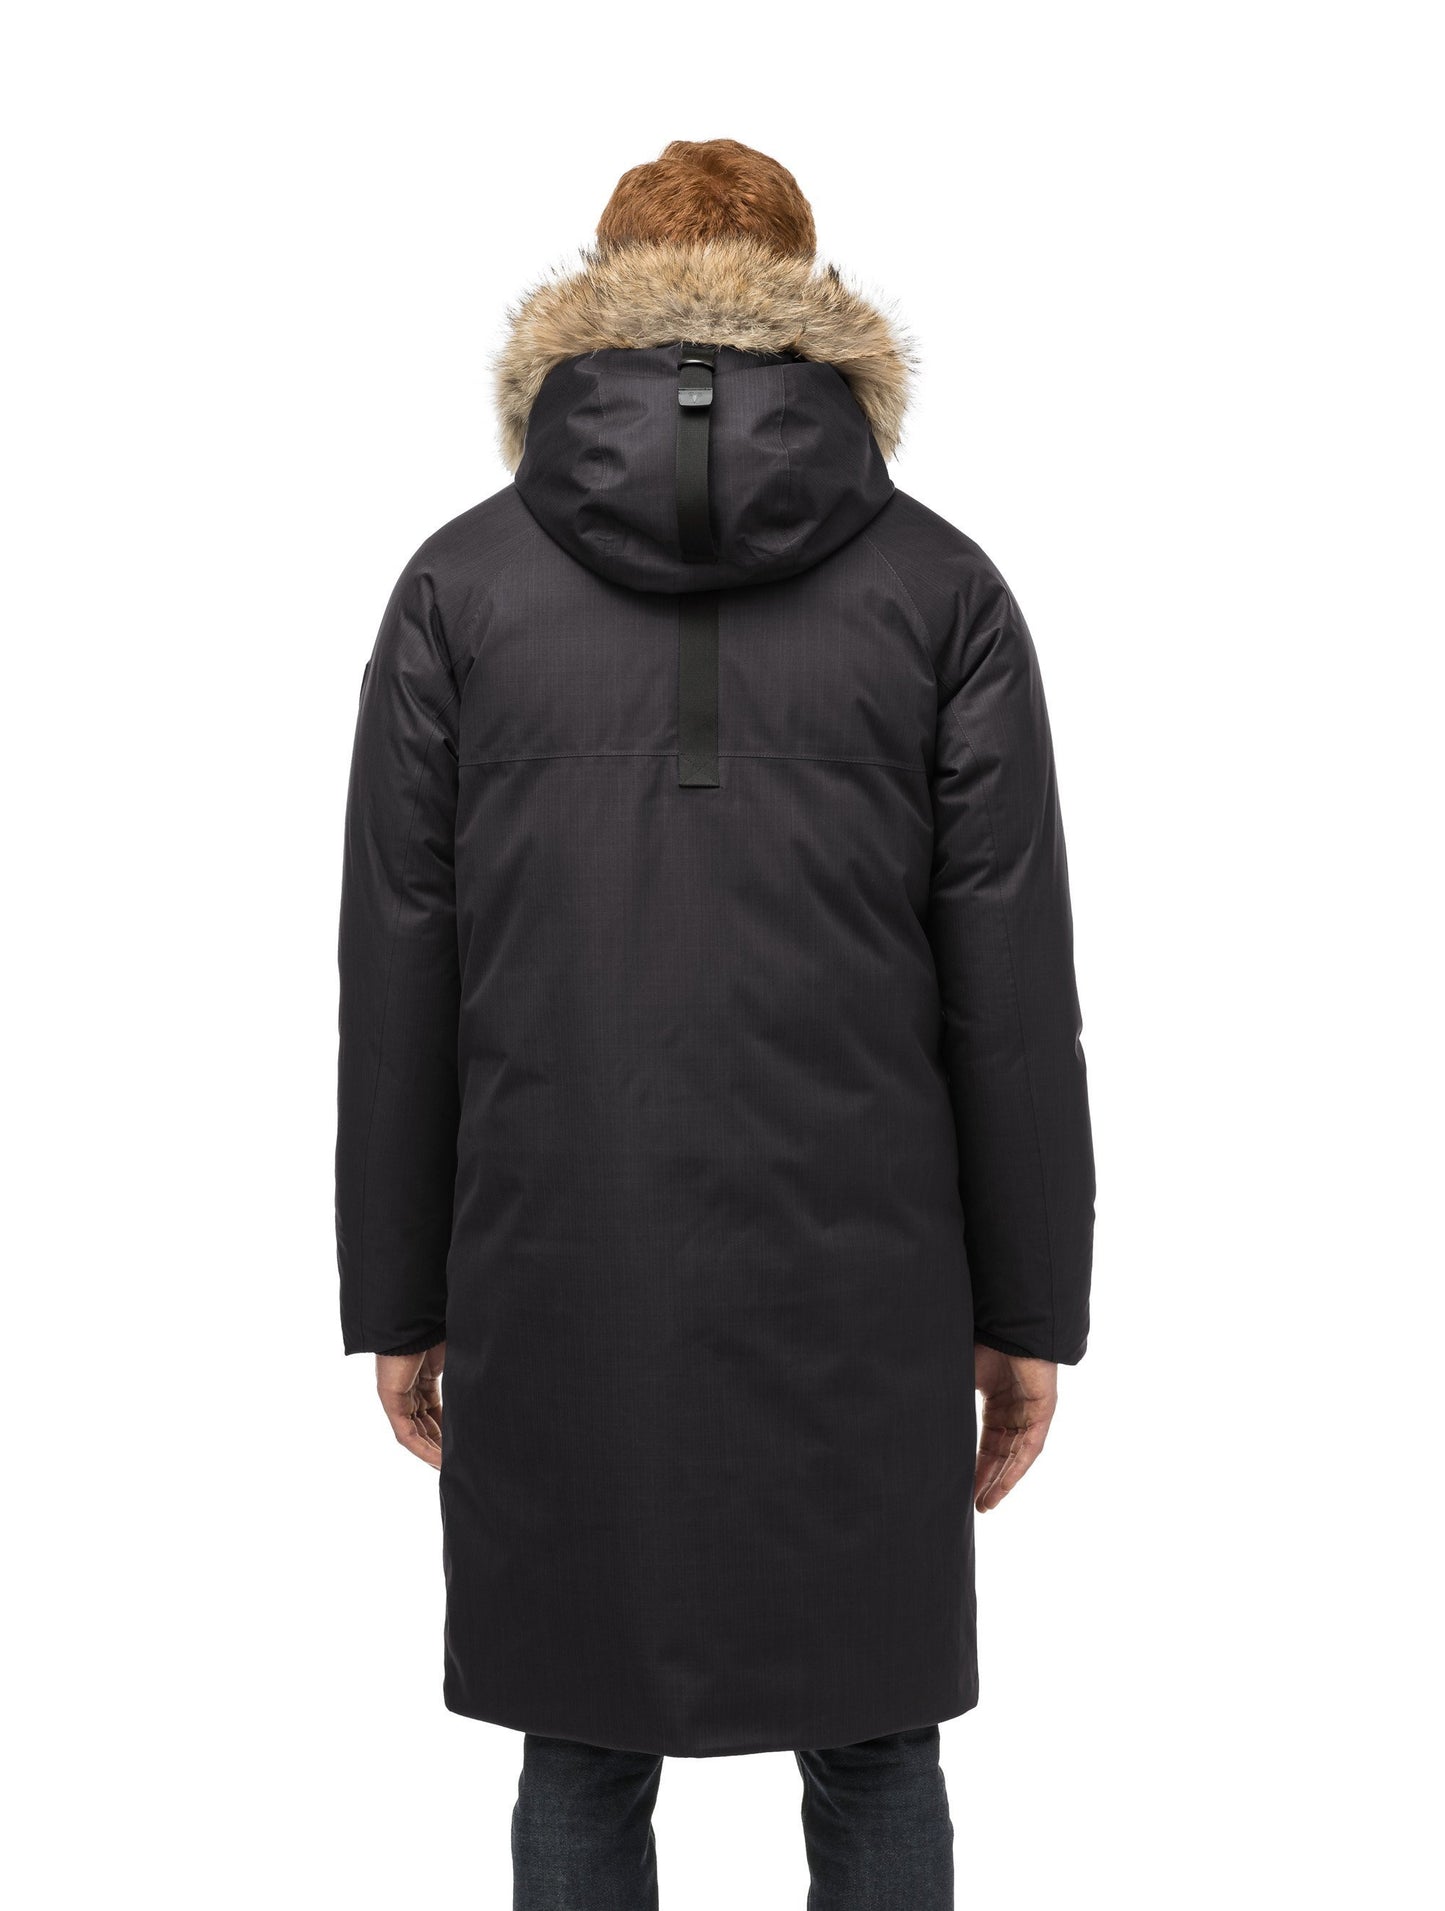 This ankle length men's down filled parka doubles as an over coat with a removable fur trim on the hood in Black